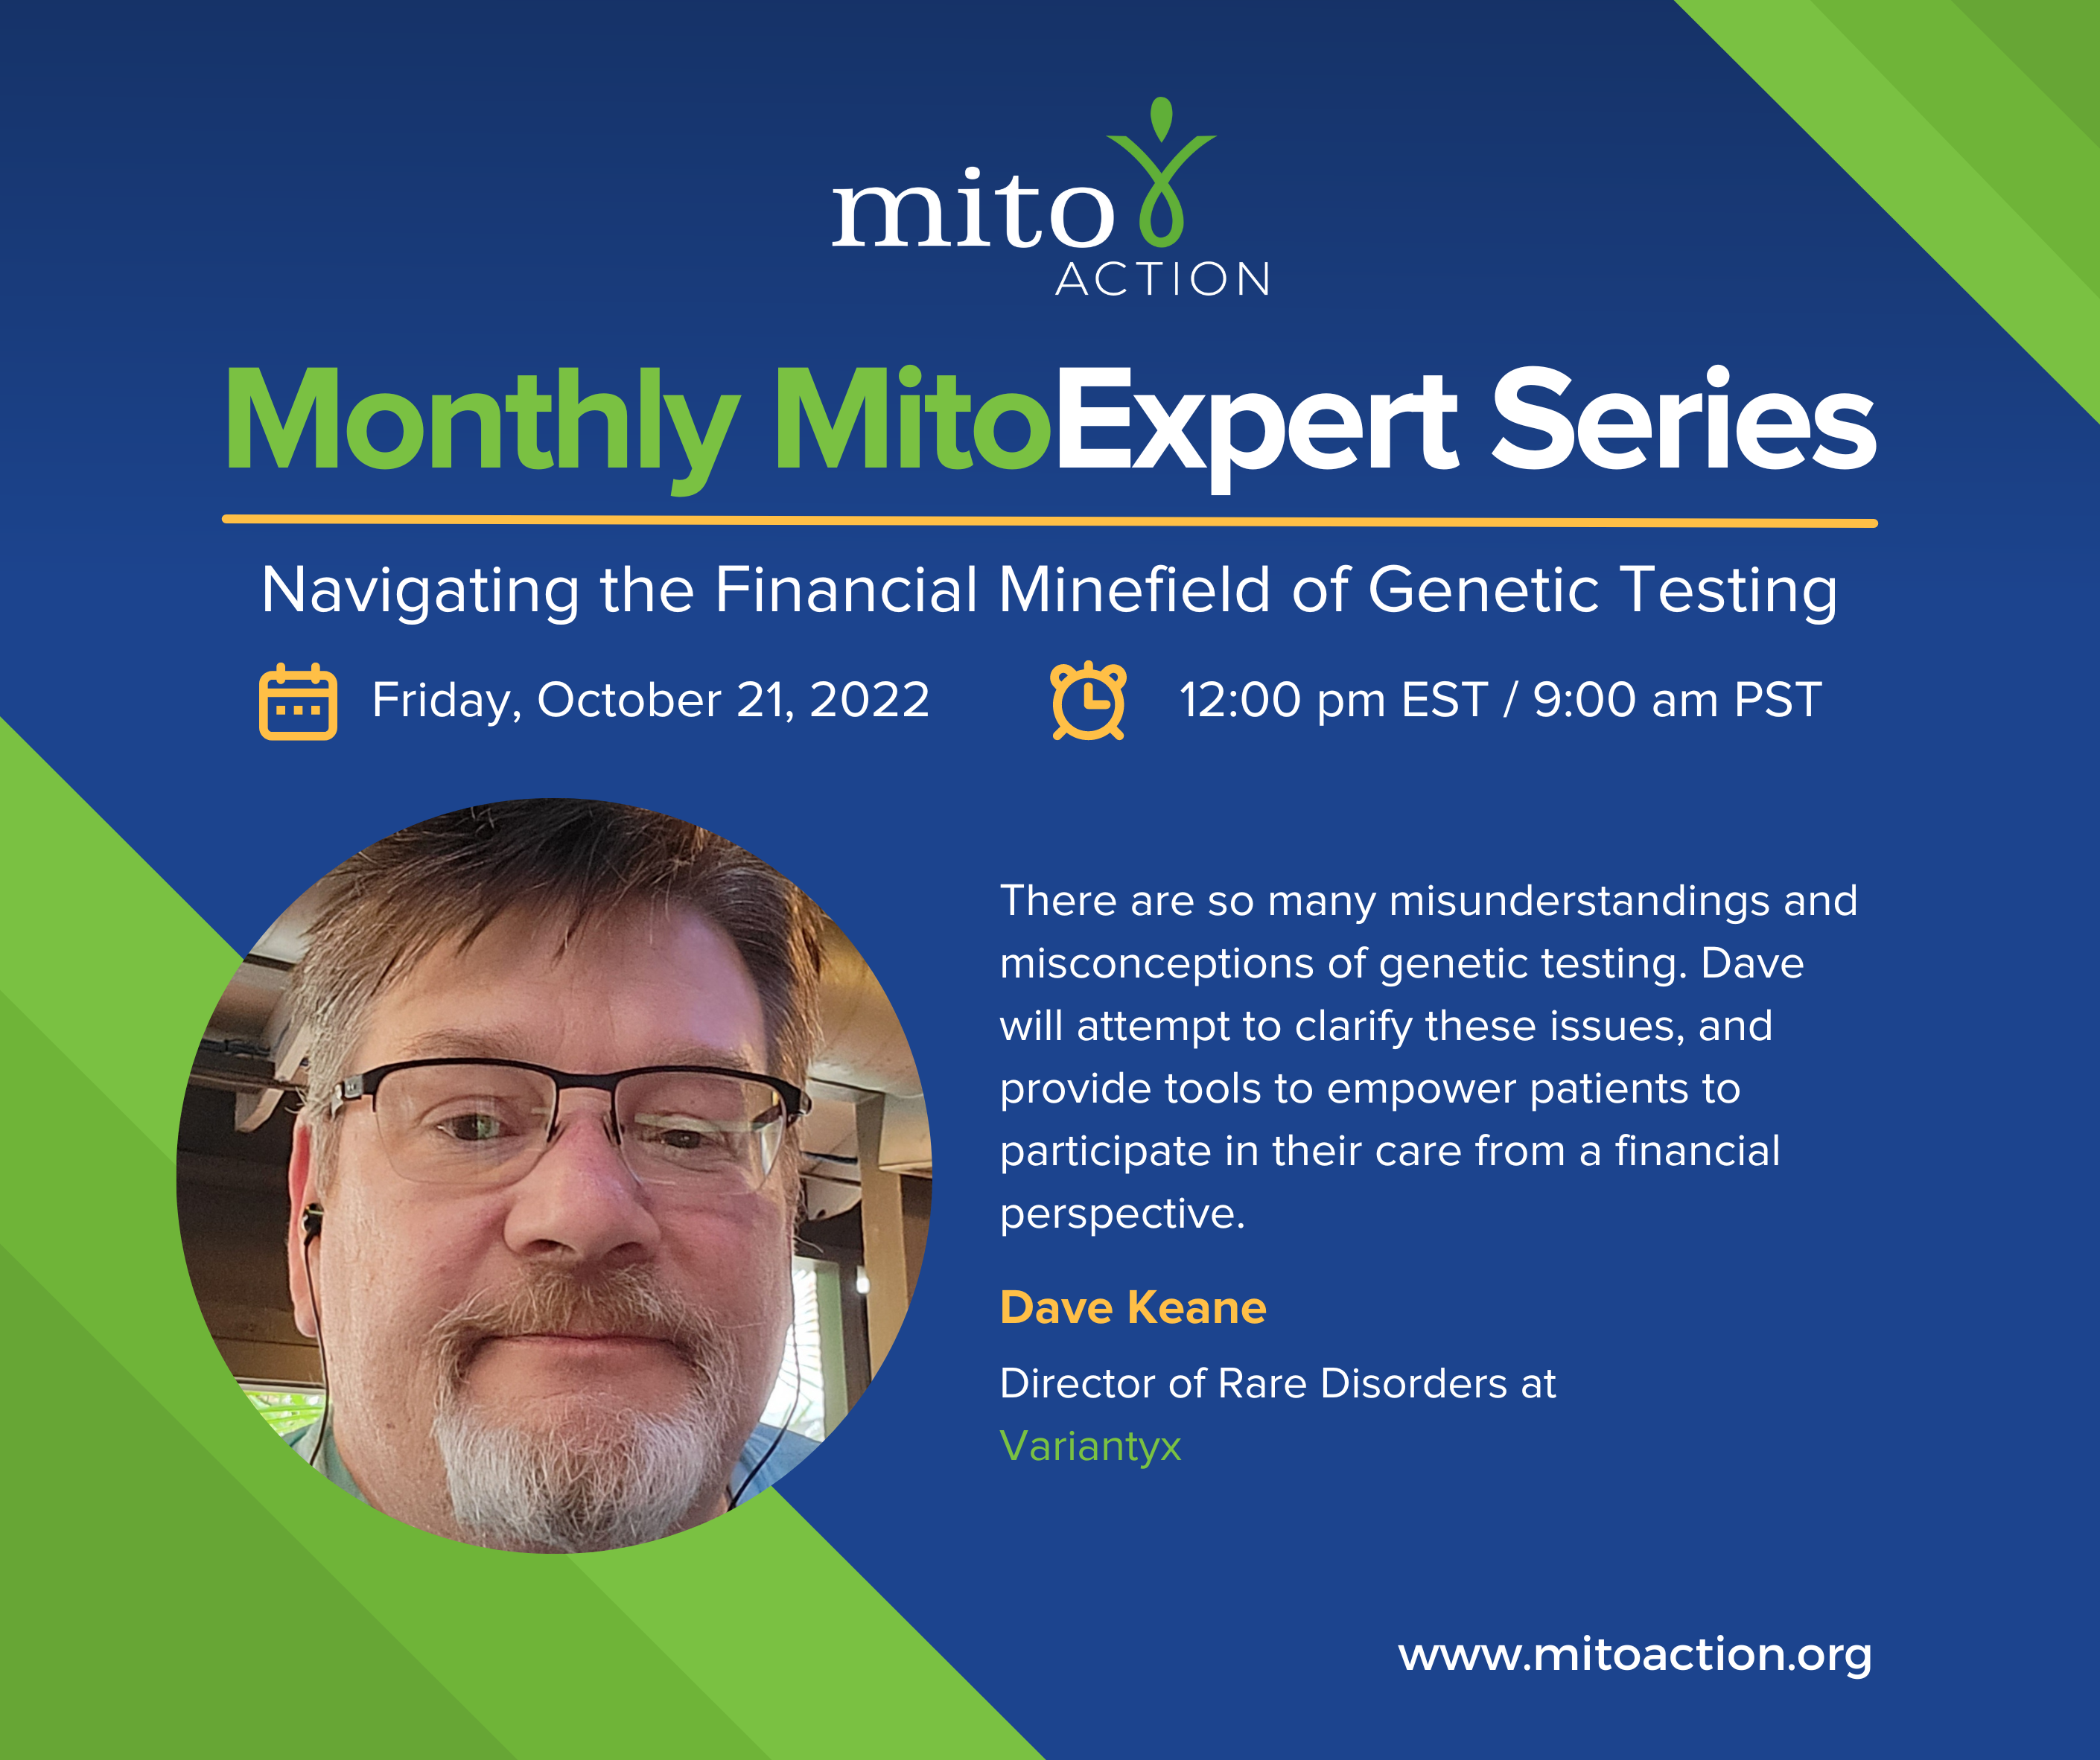 Navigating the Financial Minefield of Genetic Testing